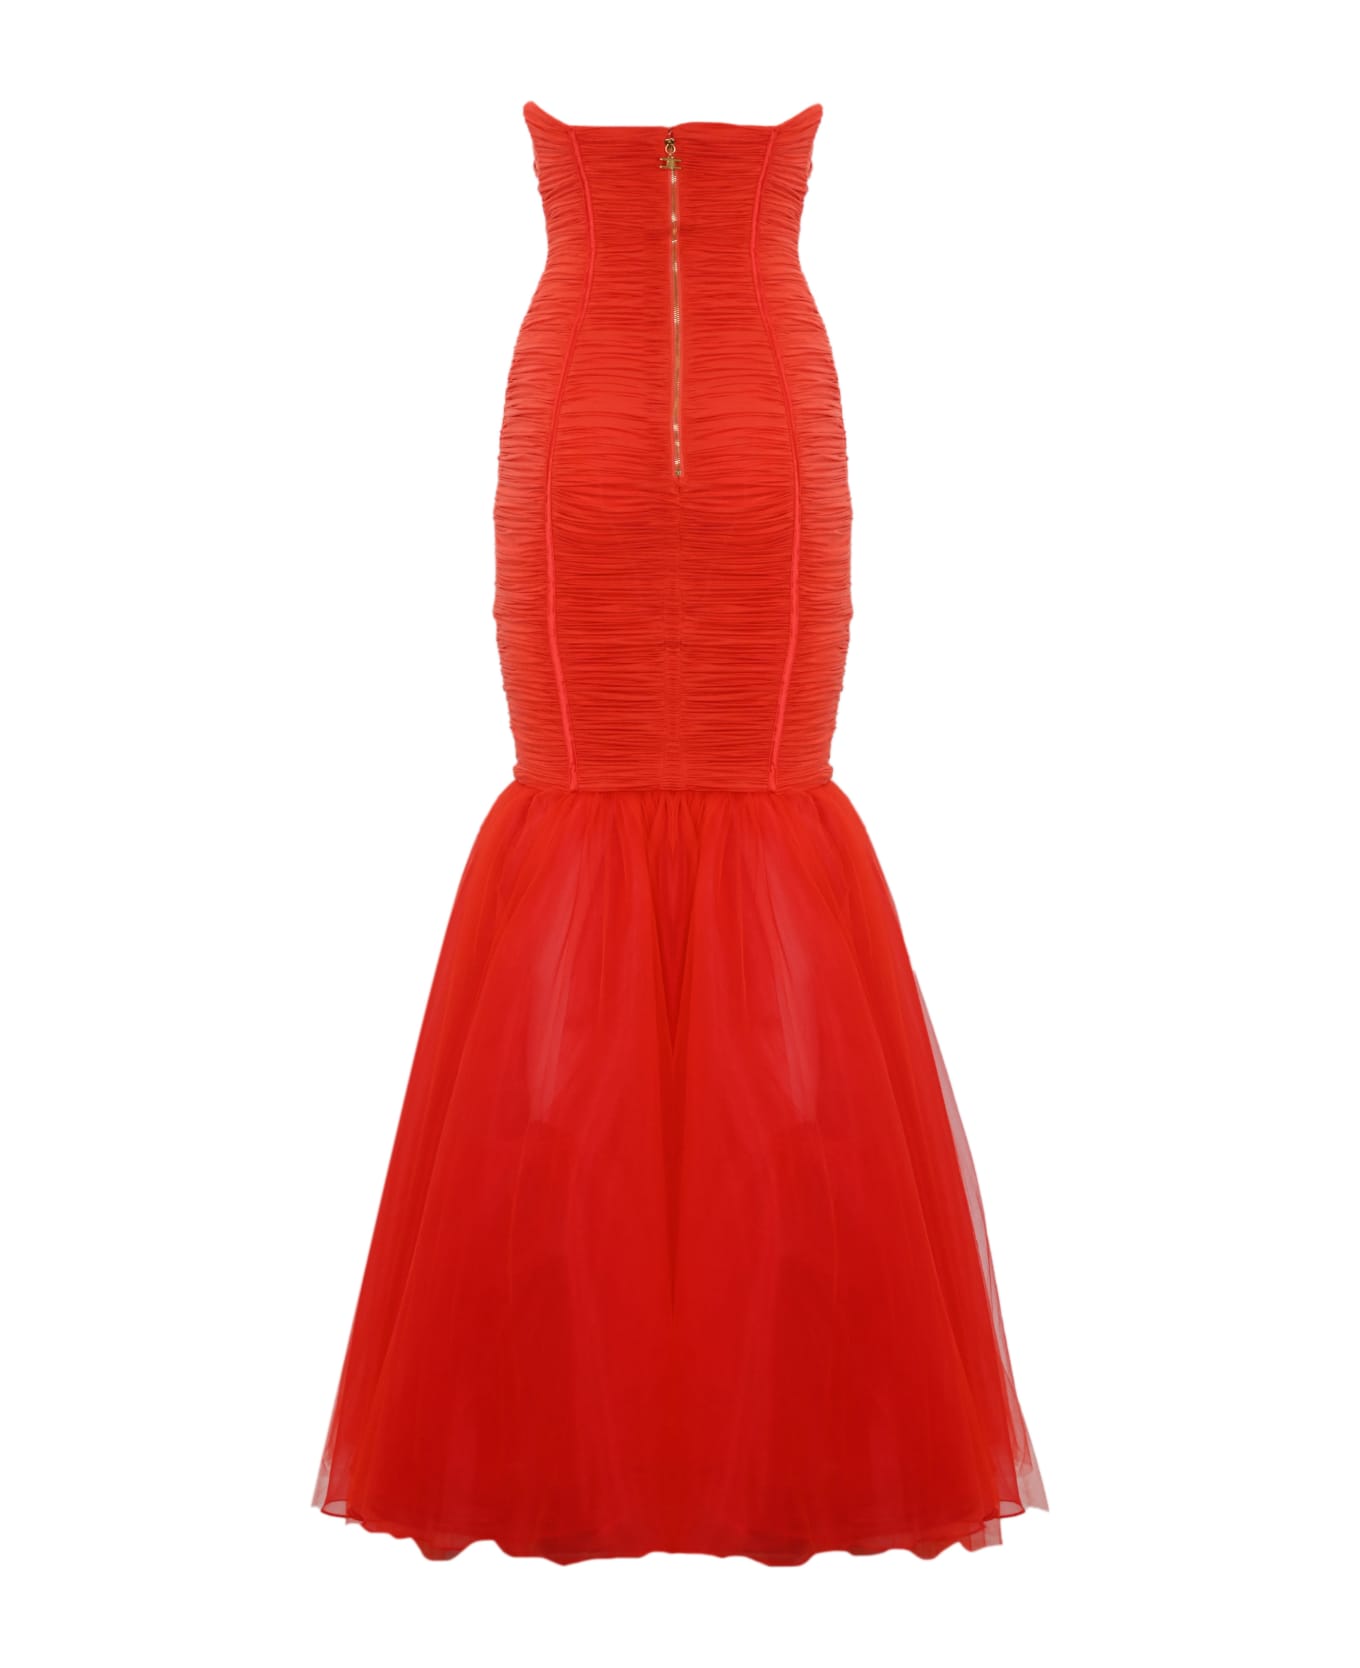 Elisabetta Franchi Red Carpet Dress In Jersey And Tulle - Corallo ワンピース＆ドレス